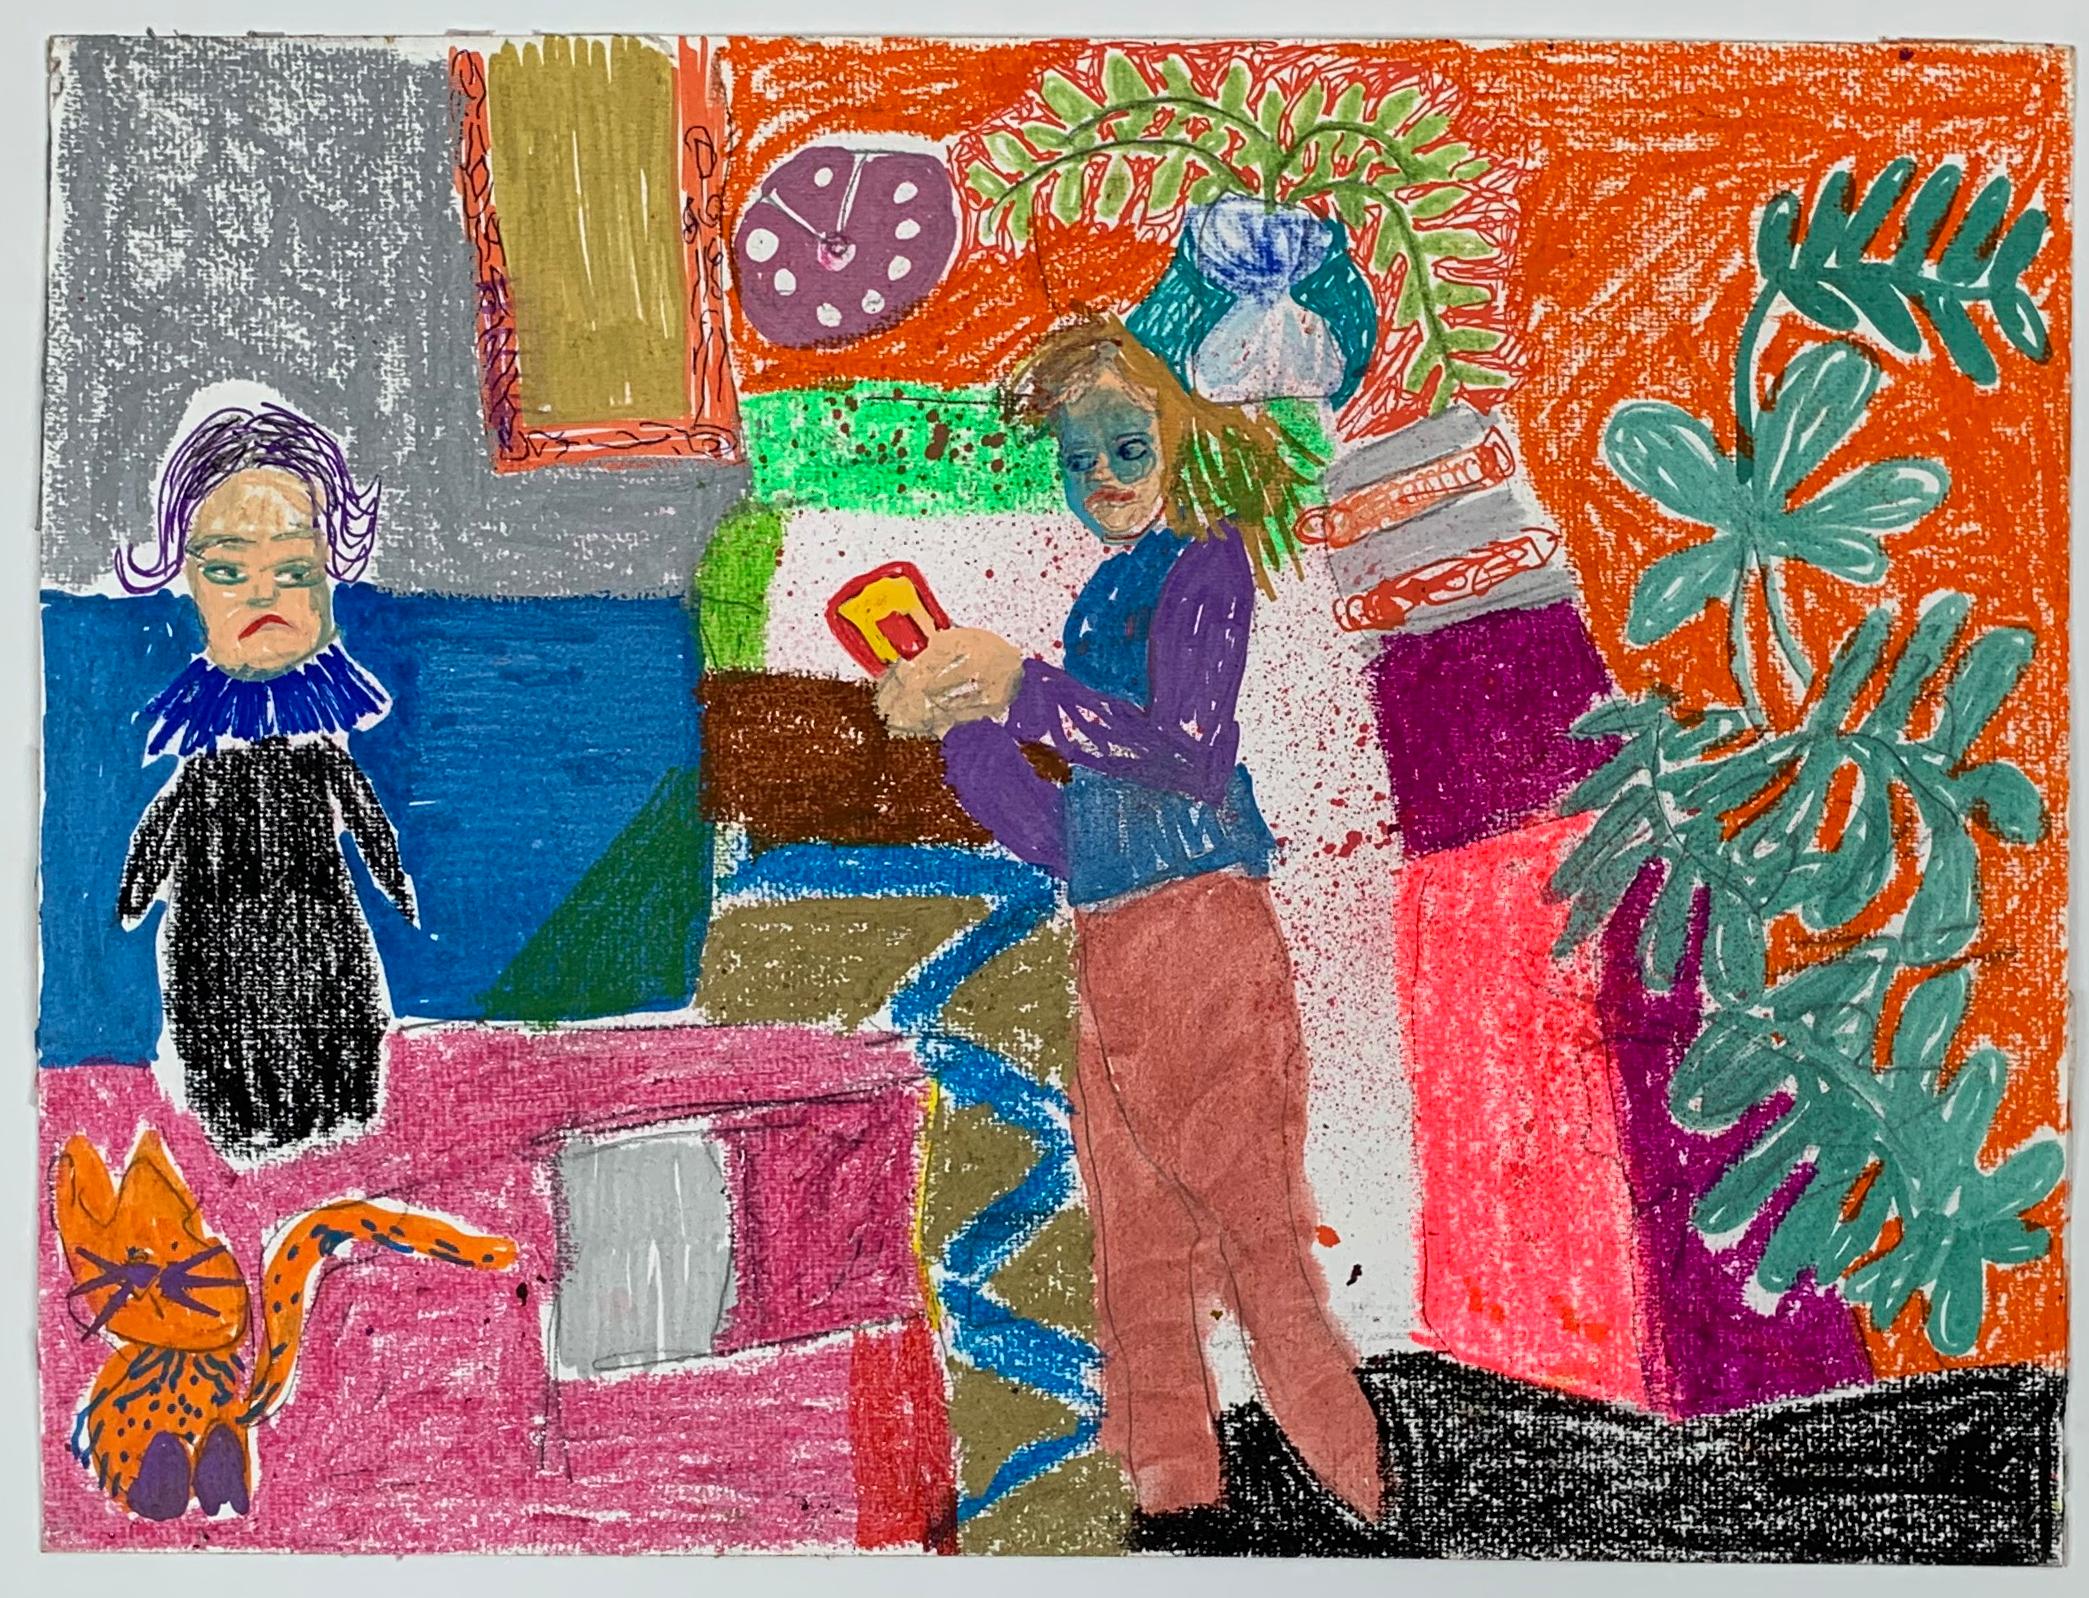 A colorful oil pastel drawing depicting a self portrait of the artist in her apartment interior. 

Tanja Ritterbex has been called the Lady Gaga of contemporary art. She makes bolds paintings, videos (vlog's), and performances about her daily life